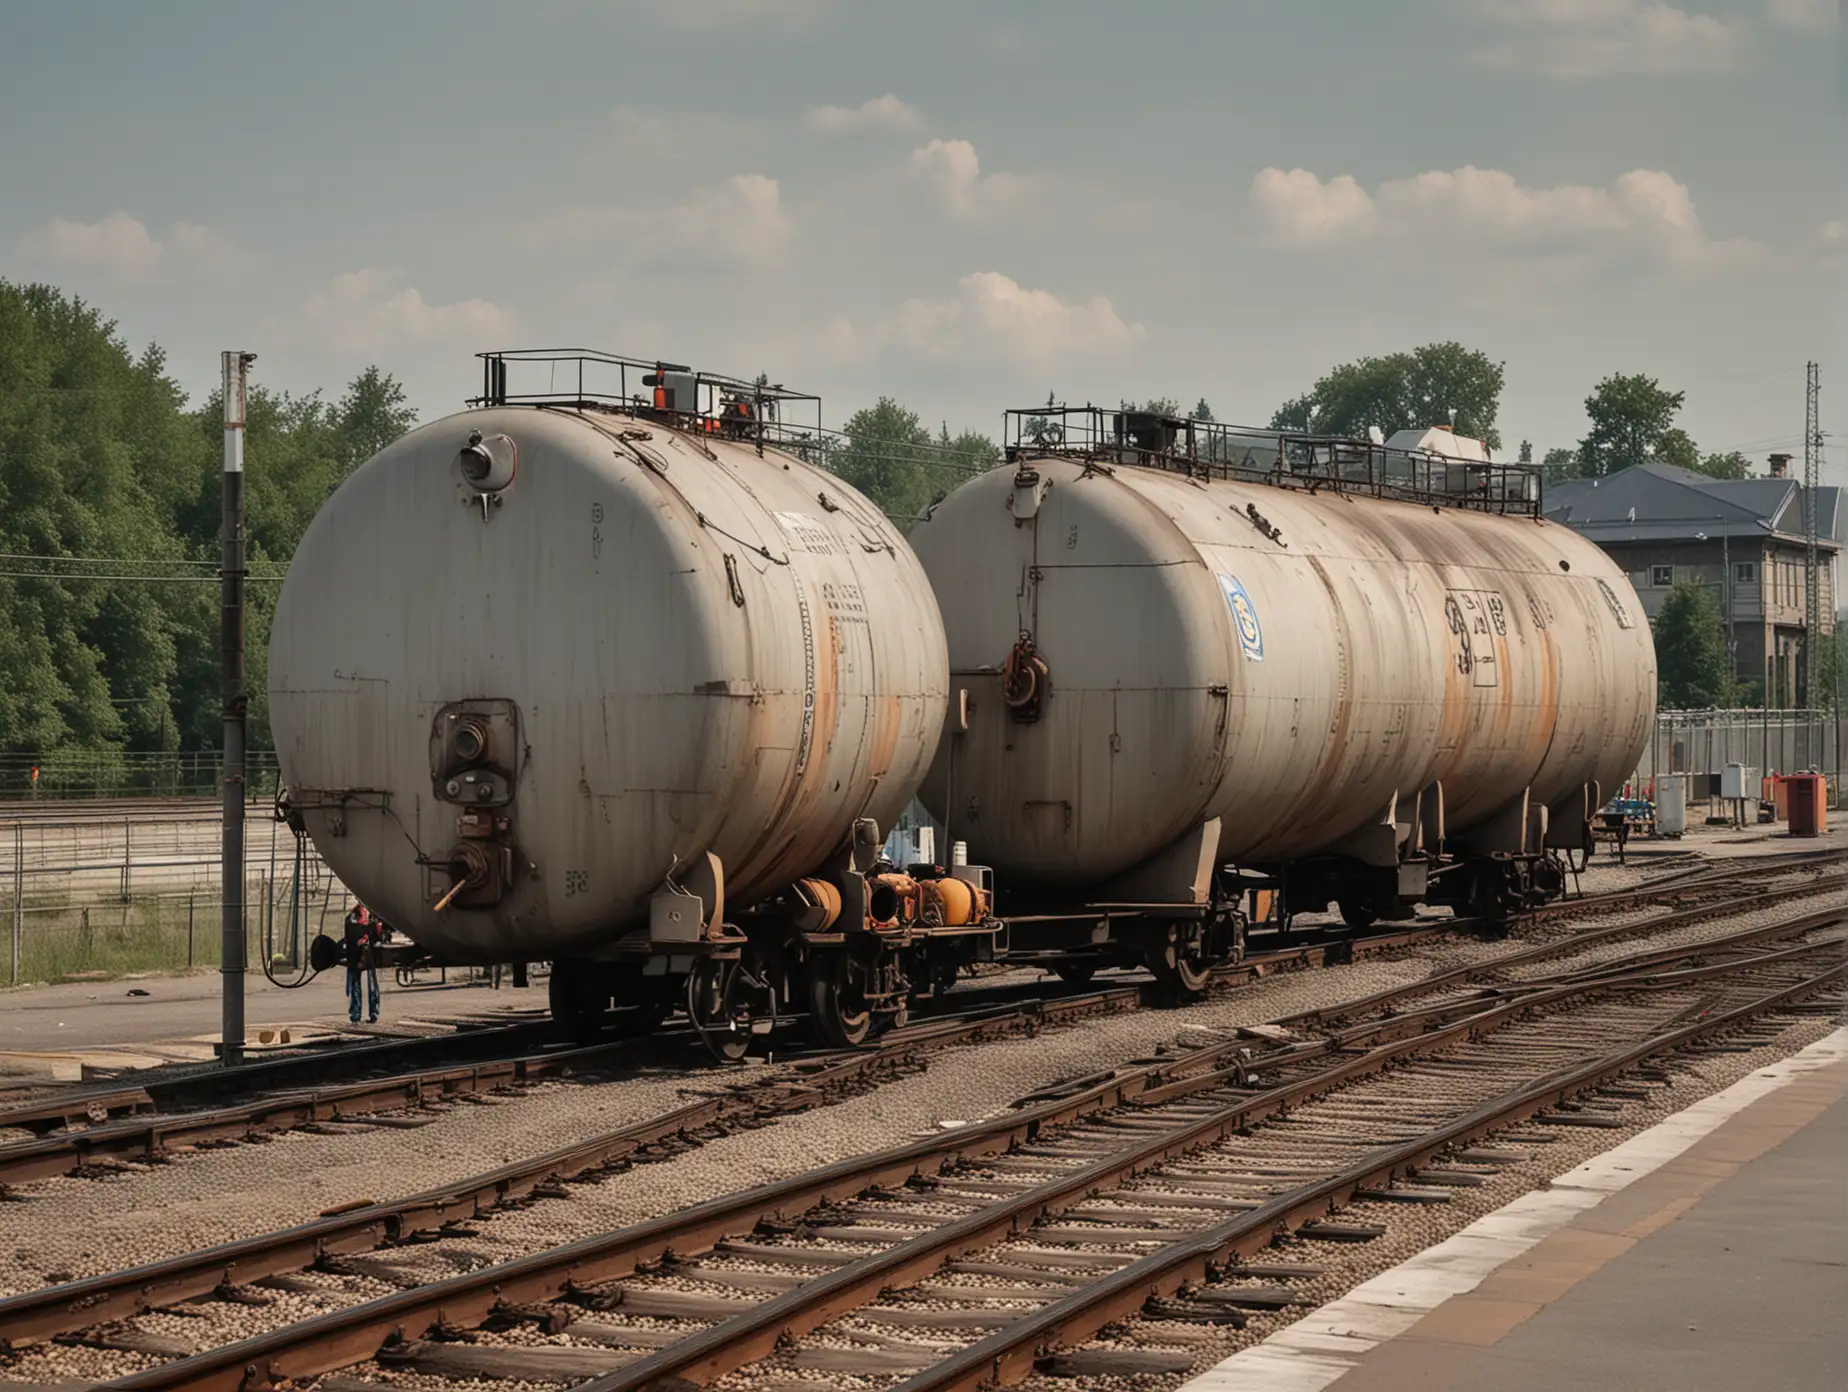 Busy-Rail-Station-with-Oil-Tank-in-Industrial-Setting